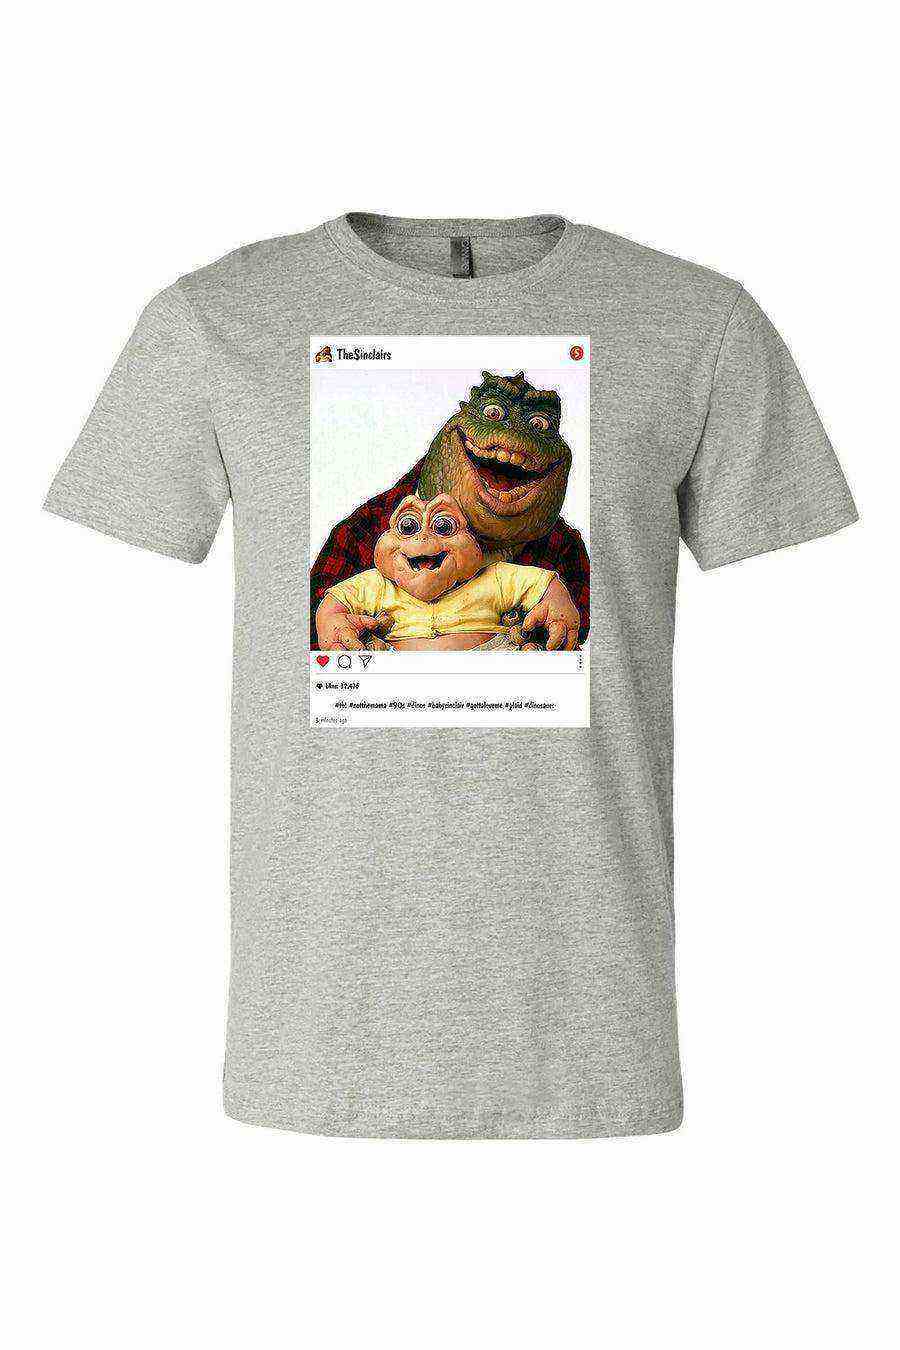 Youth | Insta Throw Back Dinosaurs Shirt | Dinosaurs - Dylan's Tees